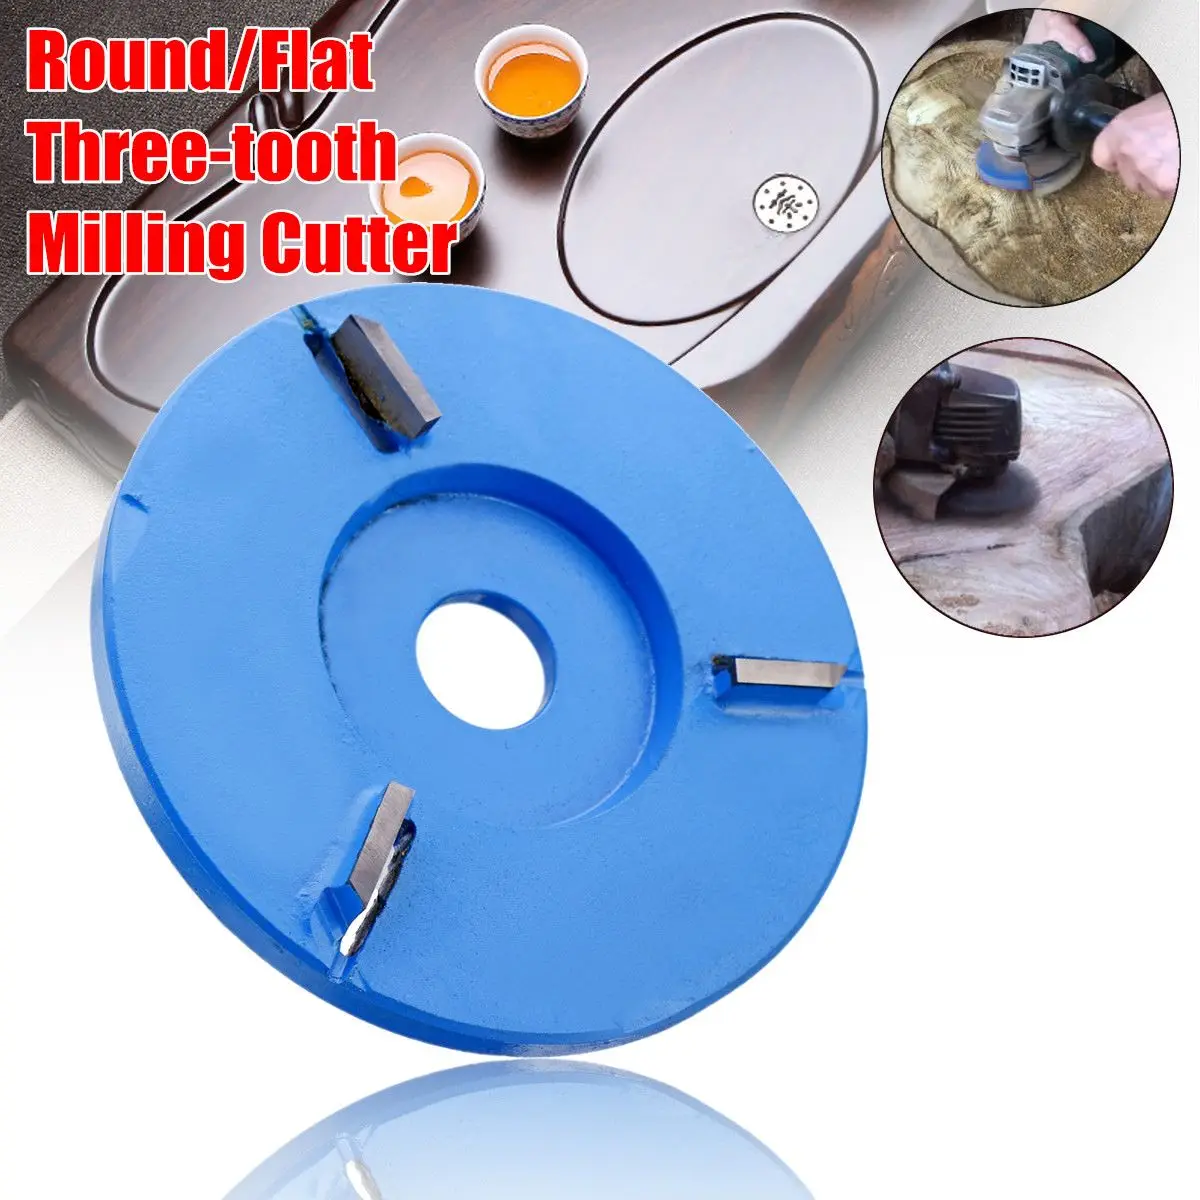 

90mm Round/Flat Wood Carving Grinder Disc Tea Tray Digging Knife Three-tooth Milling Cutter For 16mm Aperture Angle Grinder